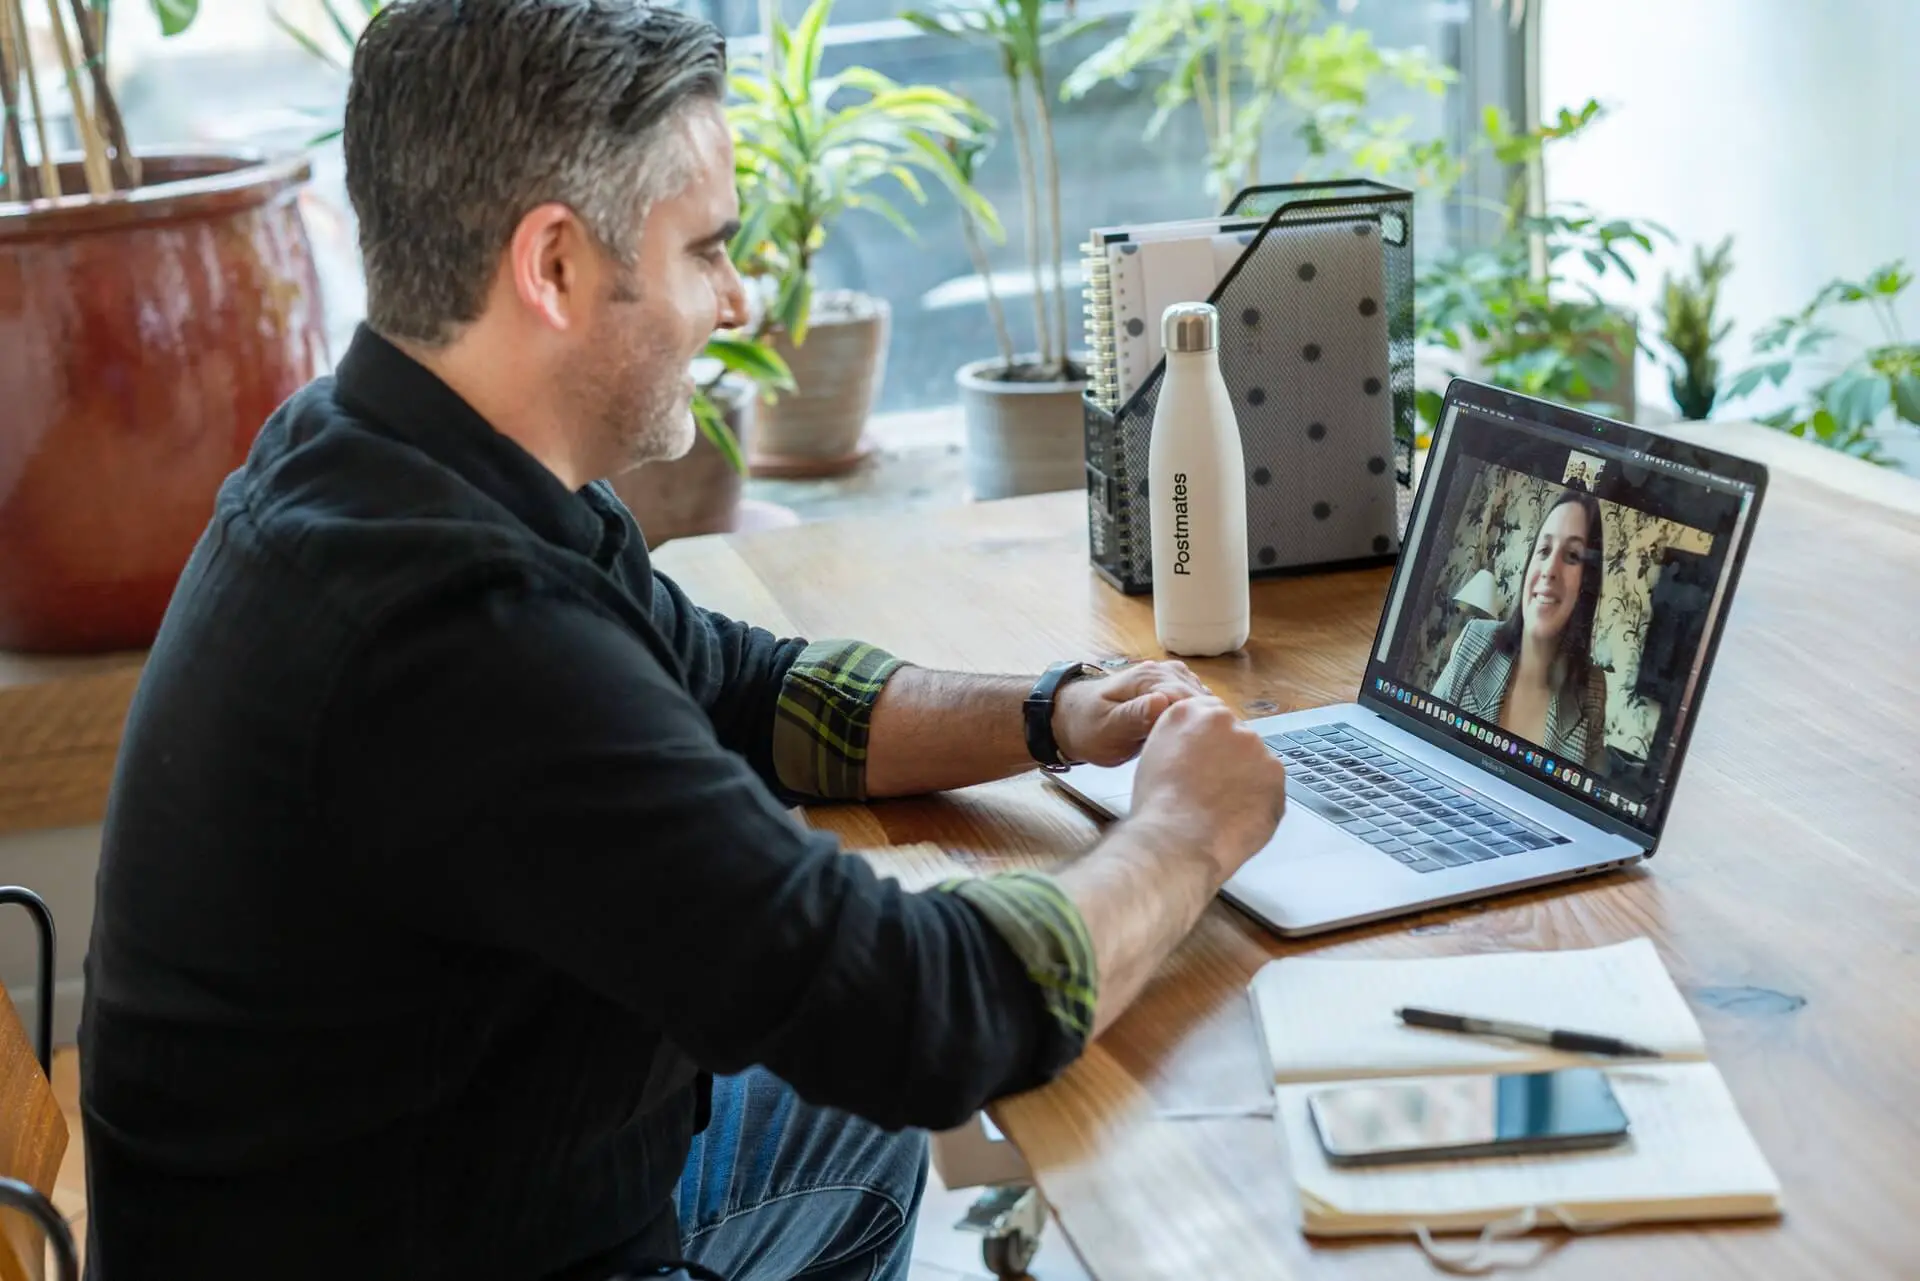 Reasons Why Video Chat Meetings Are Better Than In-Person Meetings